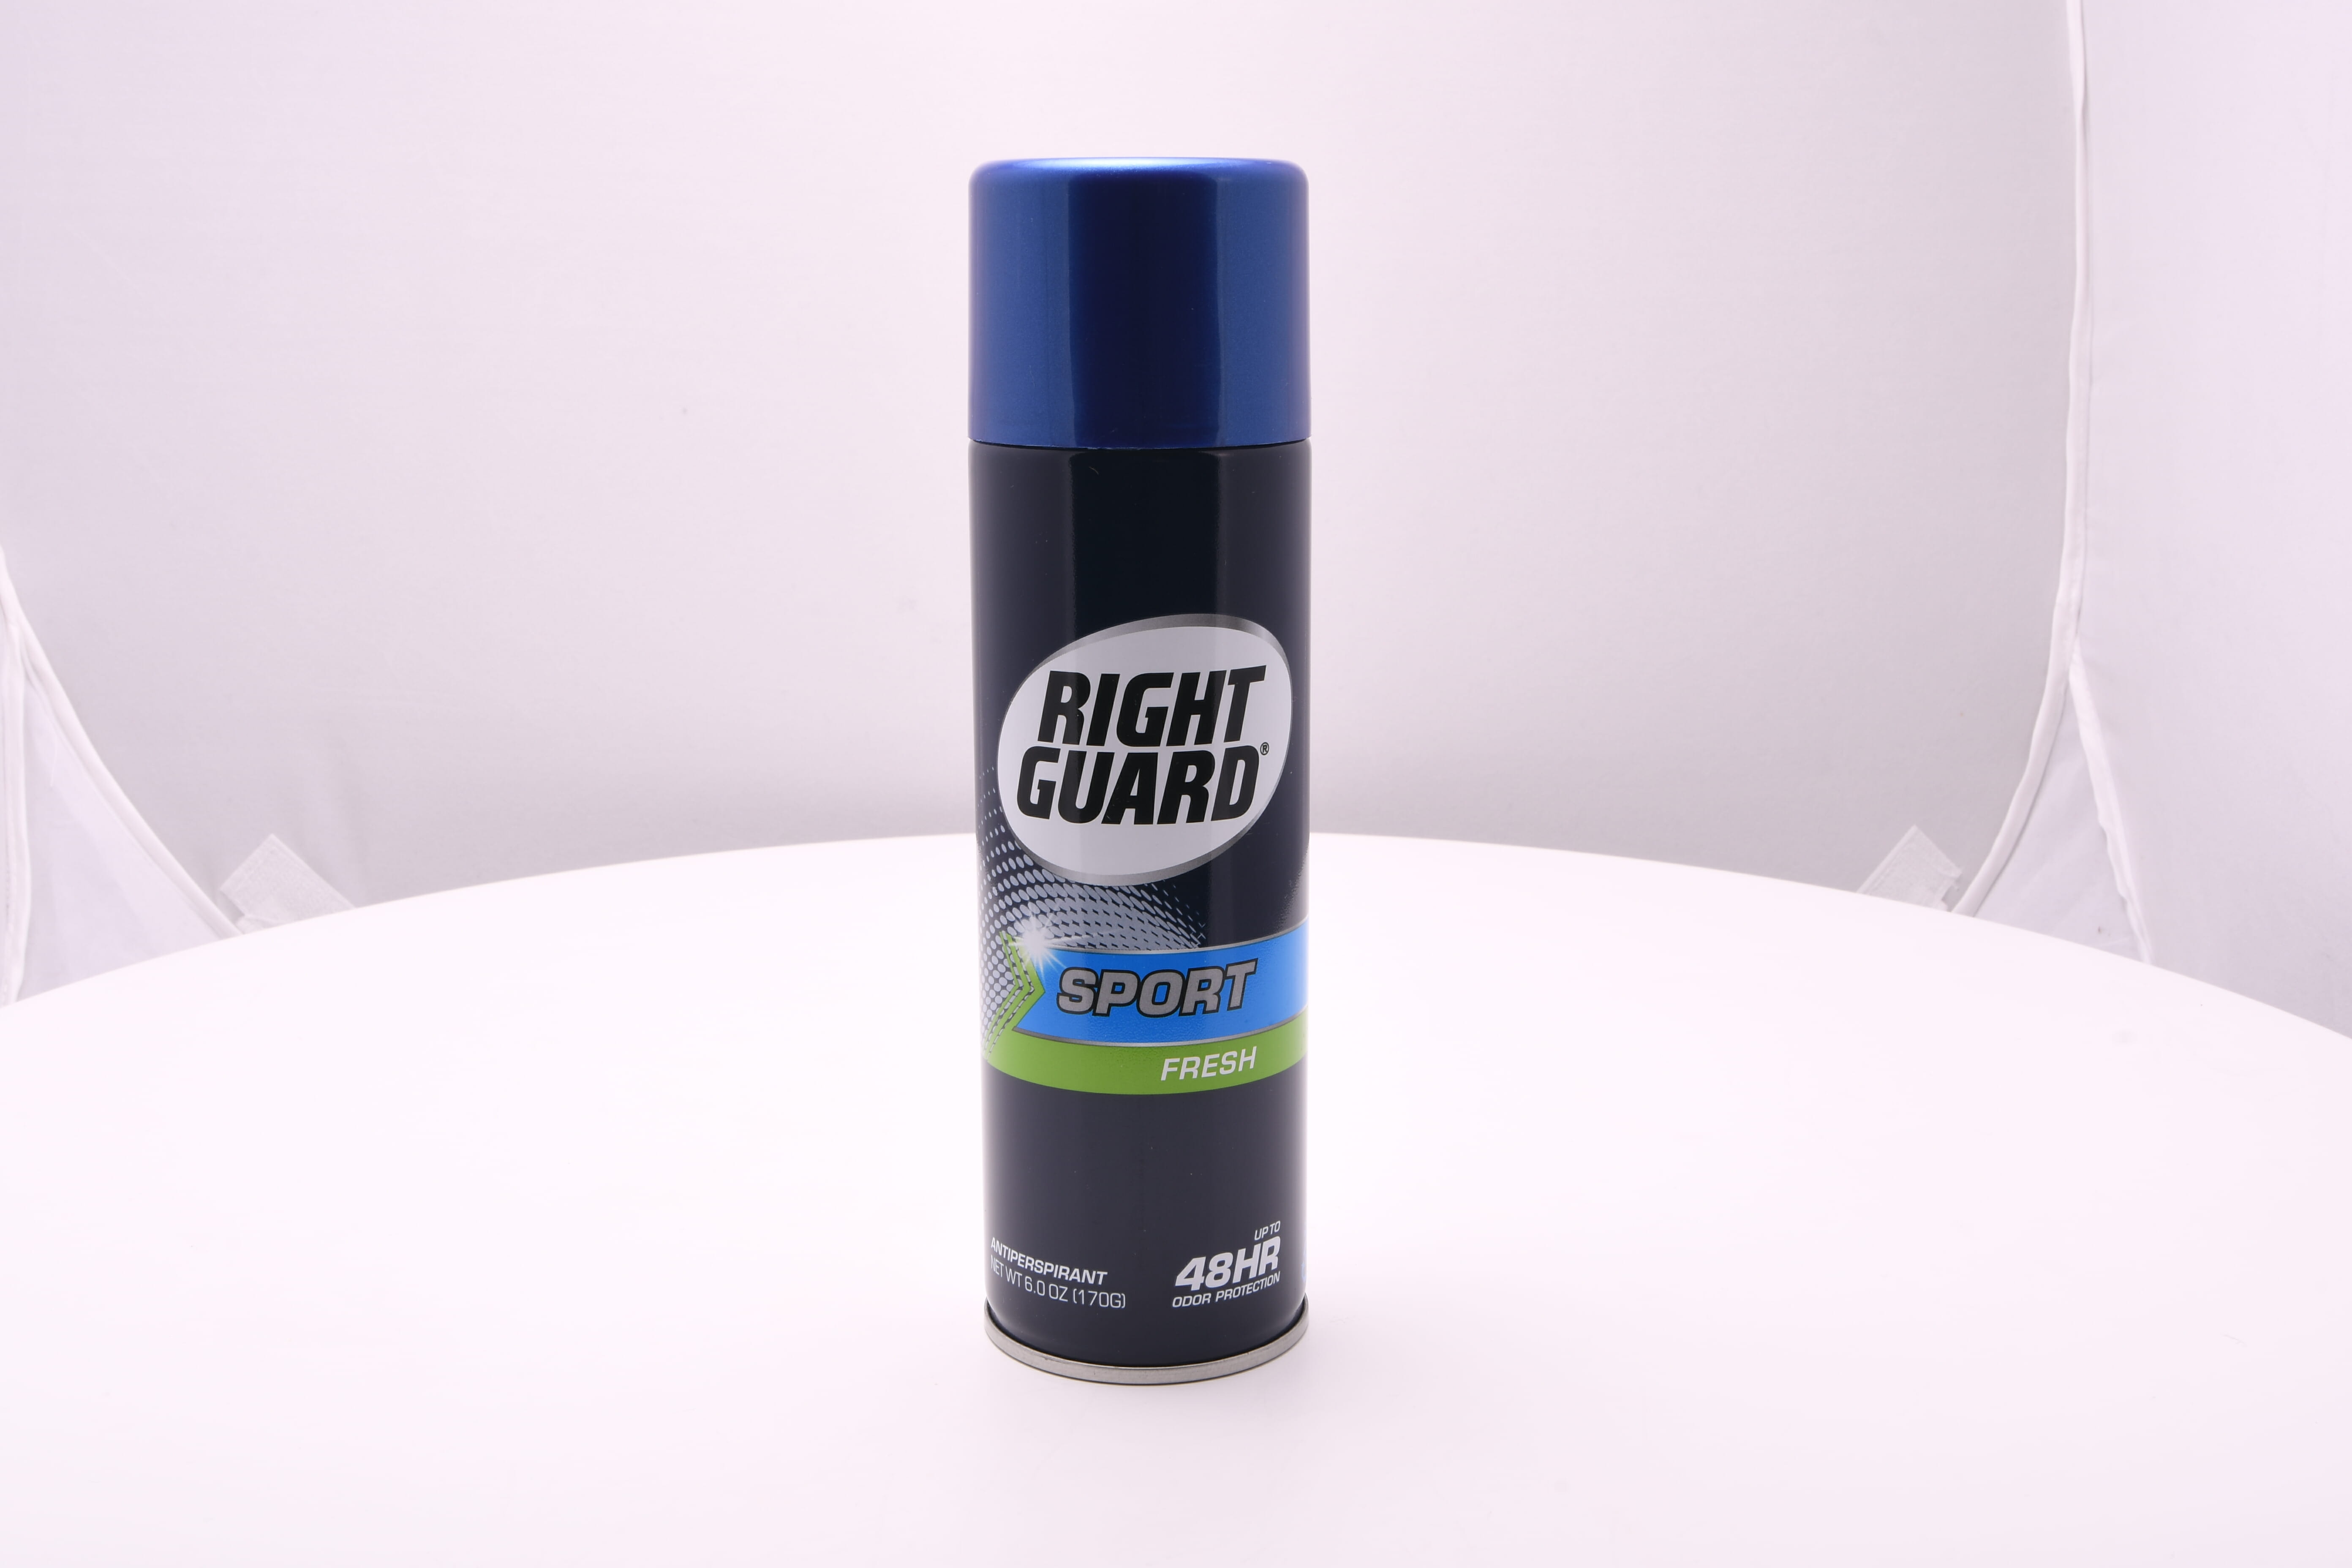 An antiperspirant spray from Right Guard (one of the most popular brands in the category).